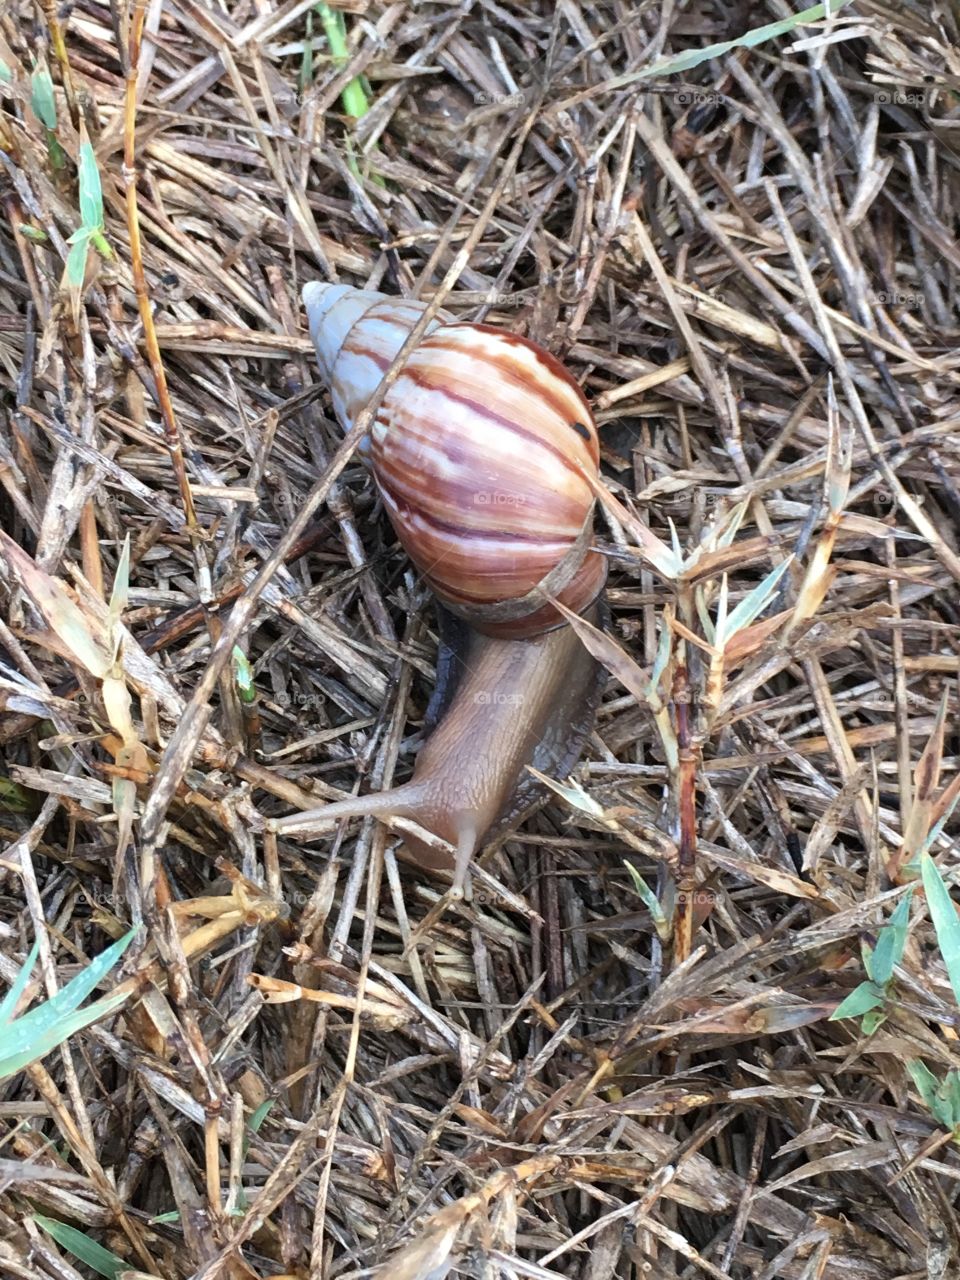 Snail in the grass.